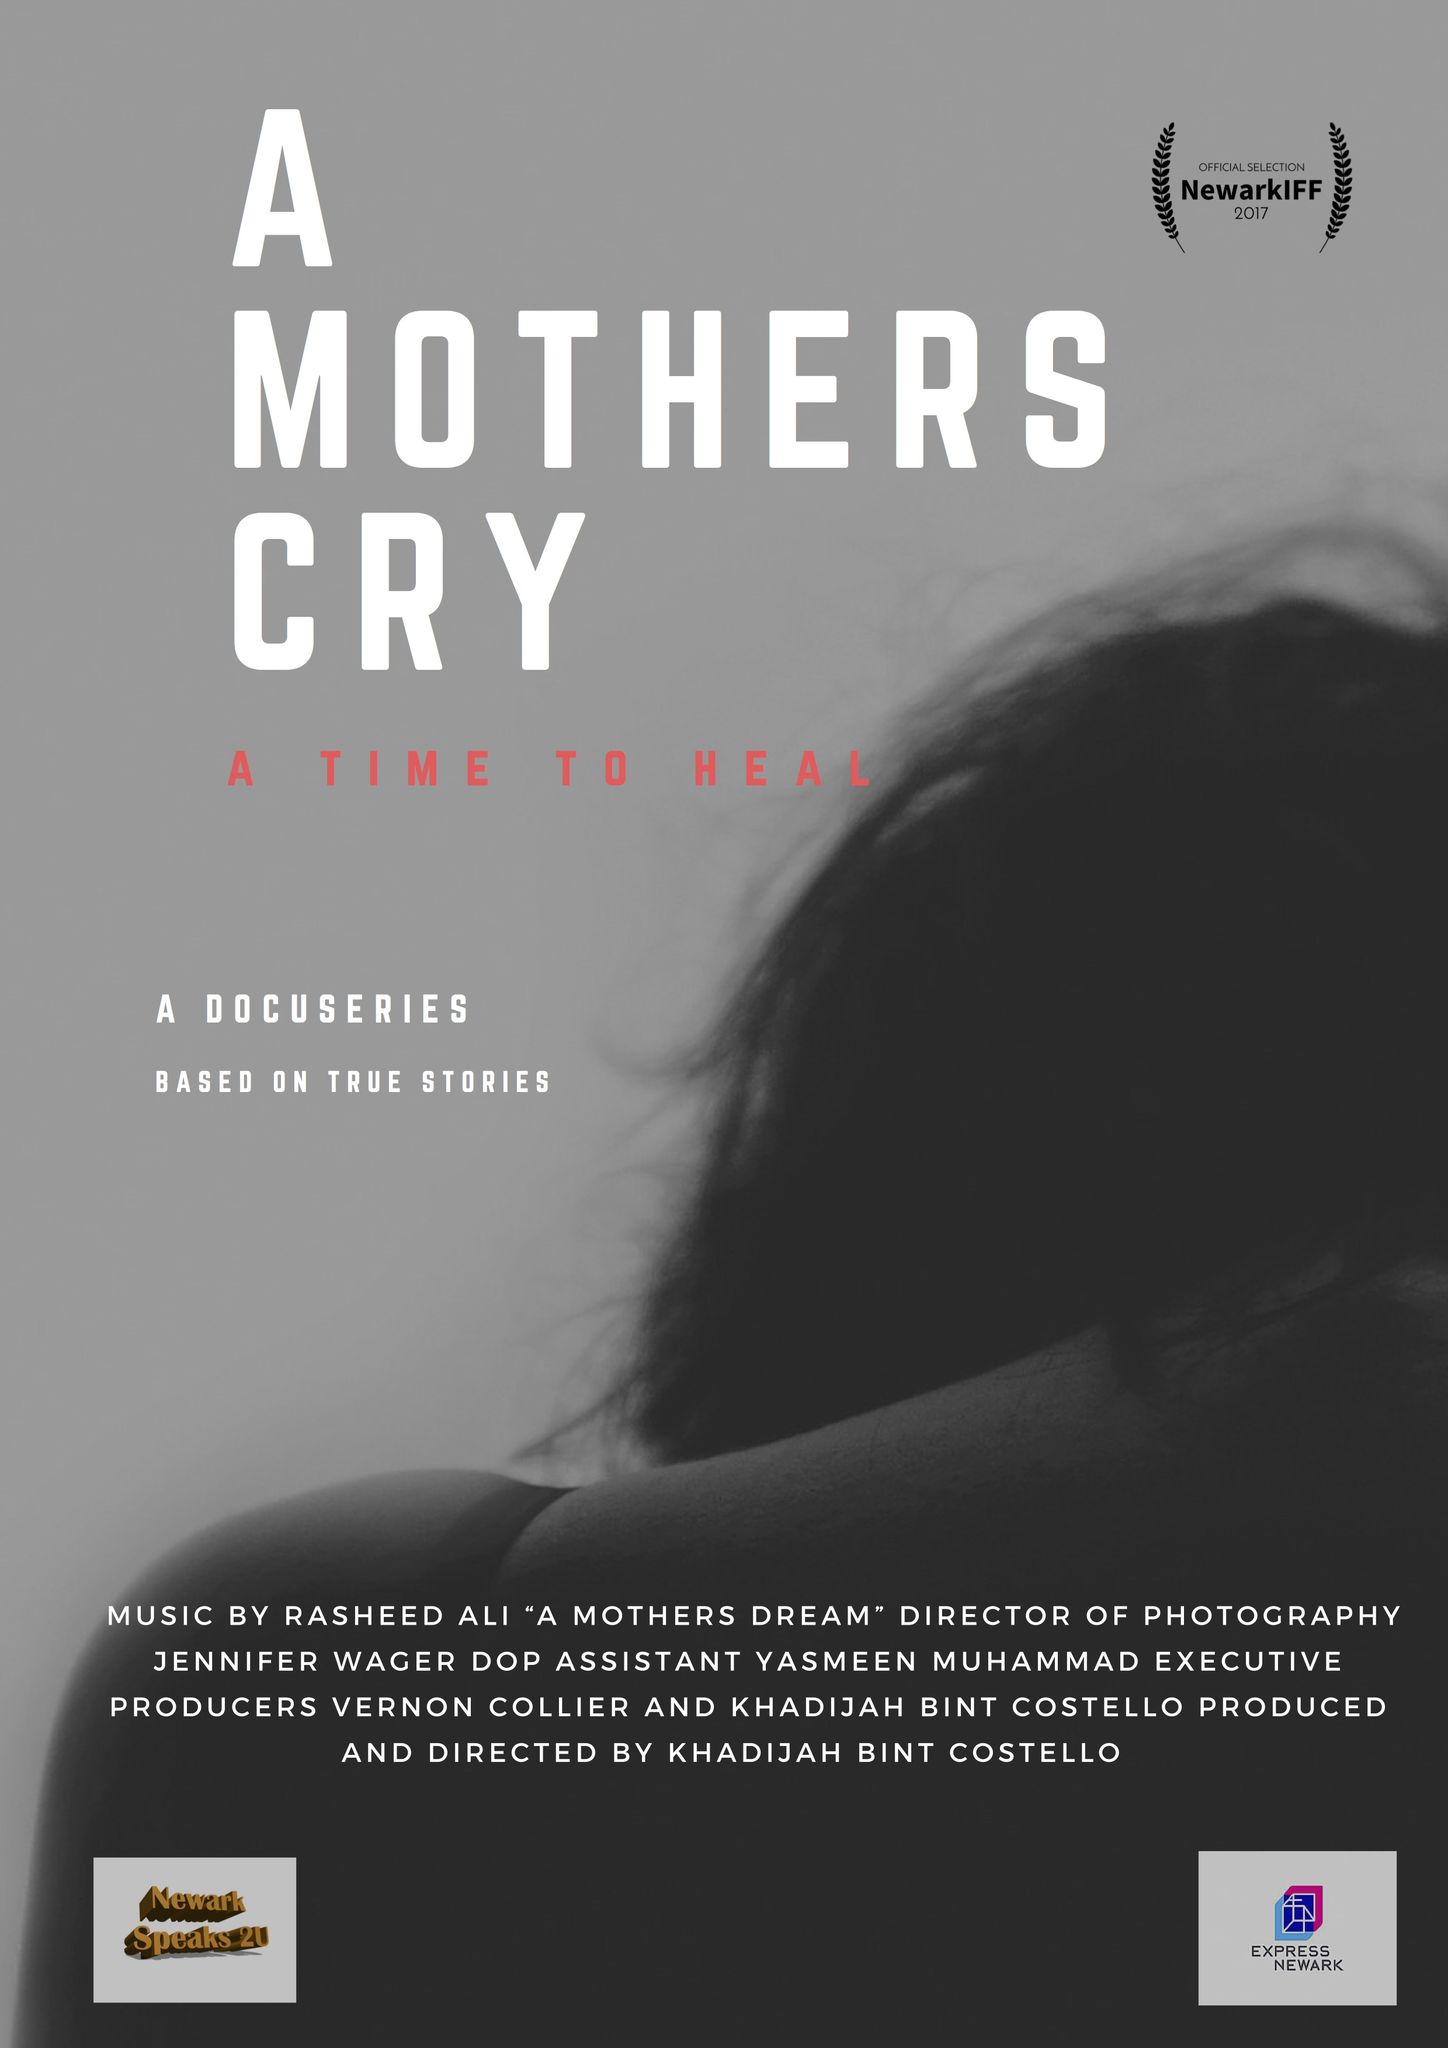 A MOTHERS' CRY